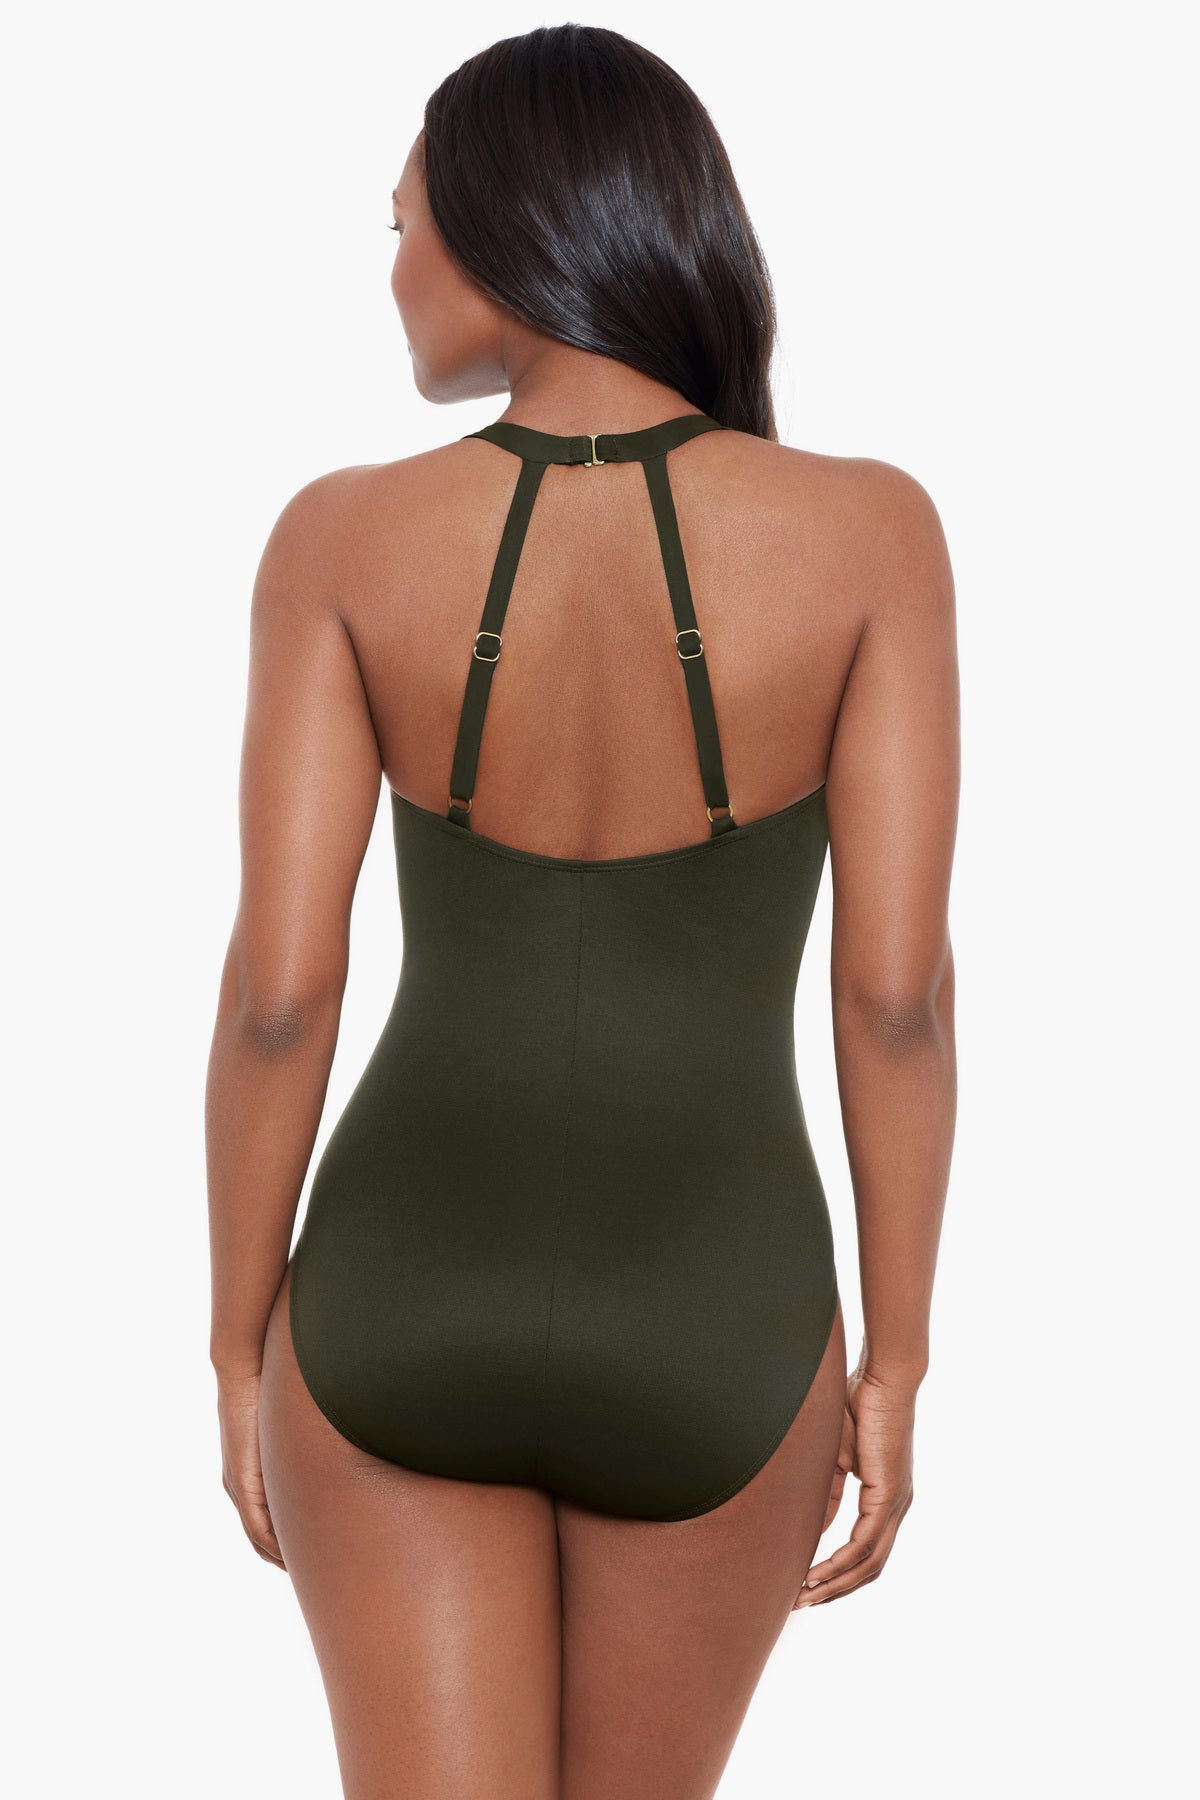 Miraclesuit Illusionists Wrapture One Piece Swimsuit